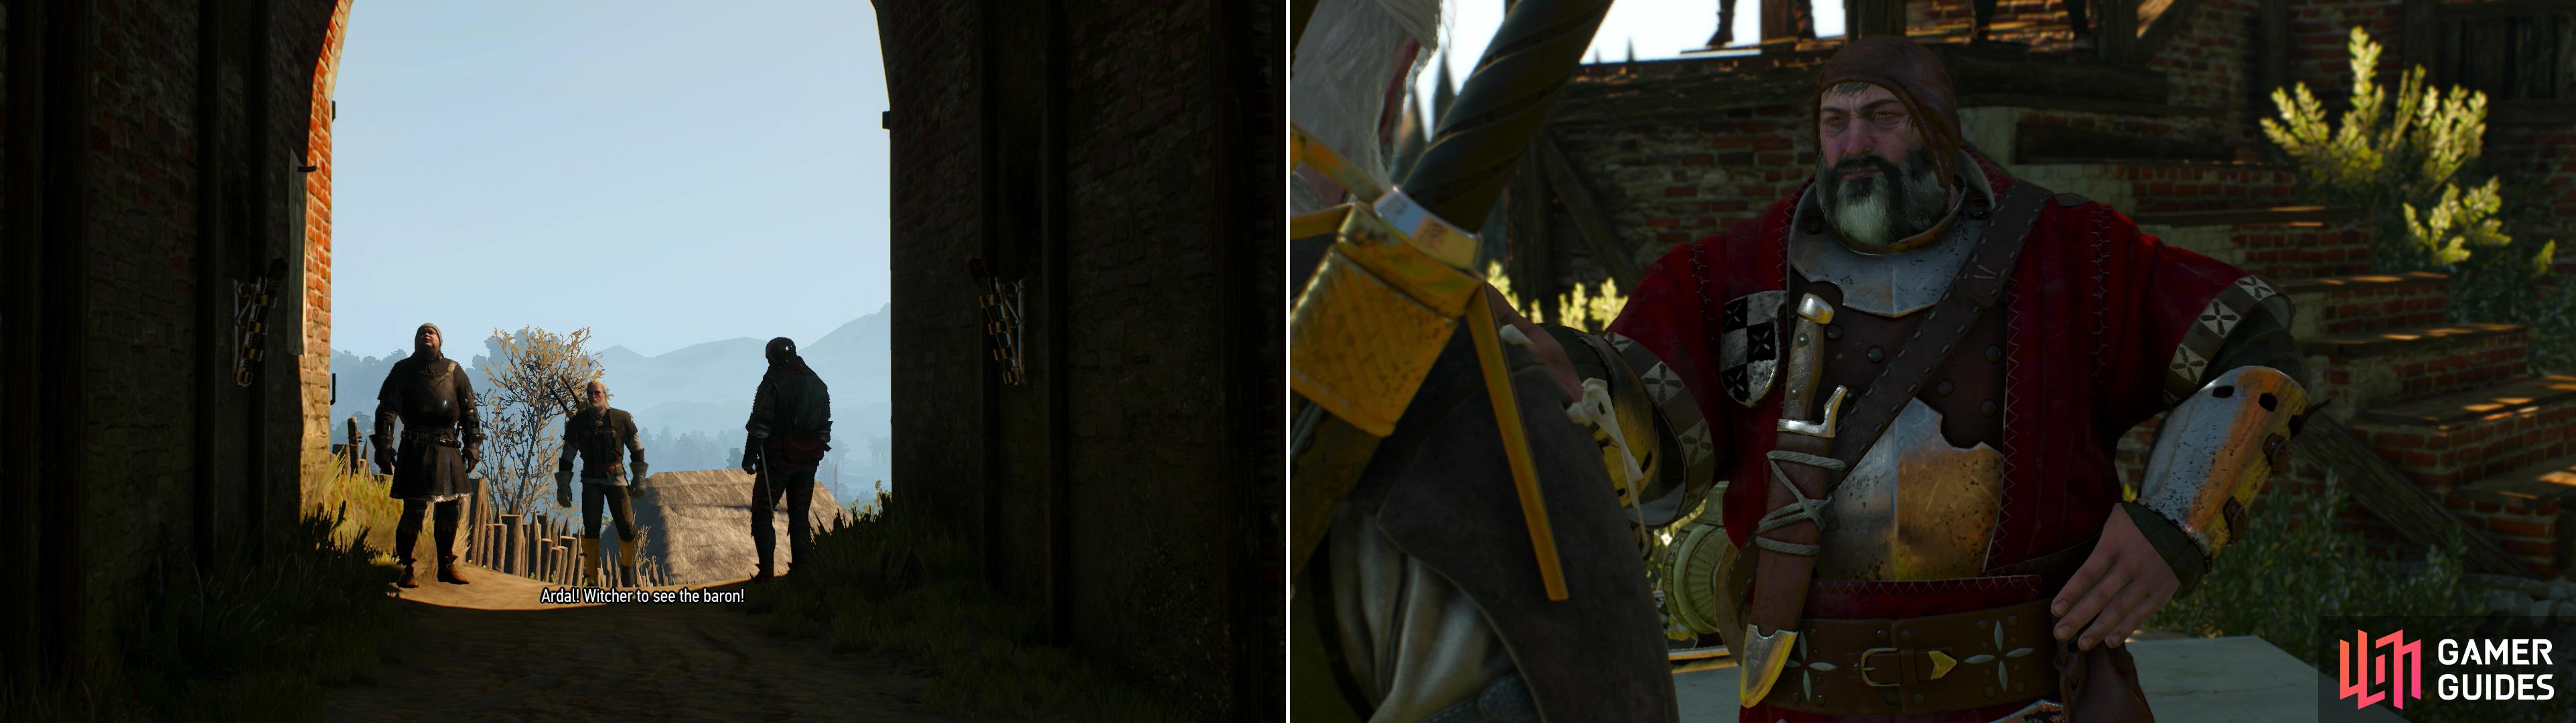 If you remained peaceful with the Baron's guards, you'll be granted an audience with the Bloody Baron with little fuss (left). However you manage it, when you meet the Baron he'll tell you about his encounter with Ciri (right).